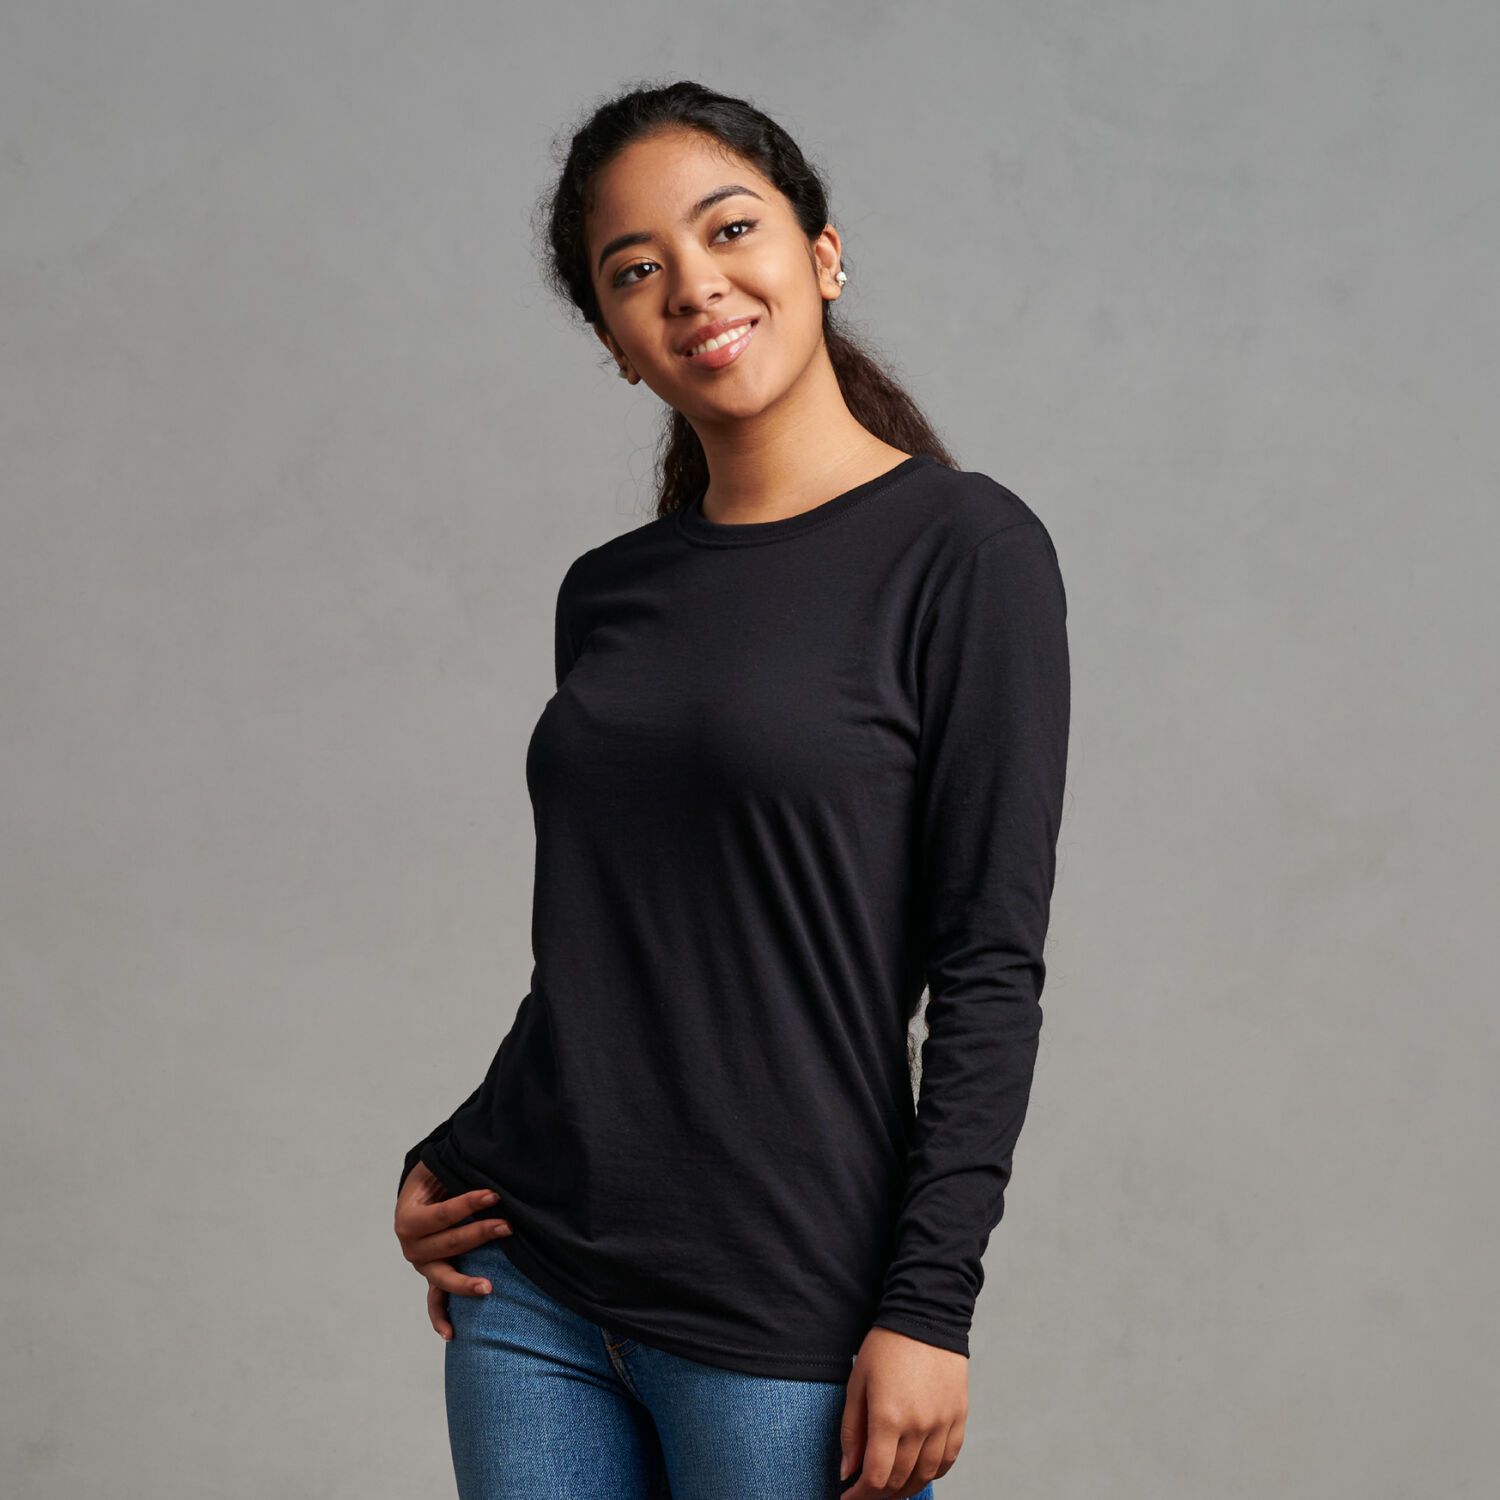 Cotton On Body ACTIVE FITTED LONG SLEEVE TOP - Long sleeved top - black 